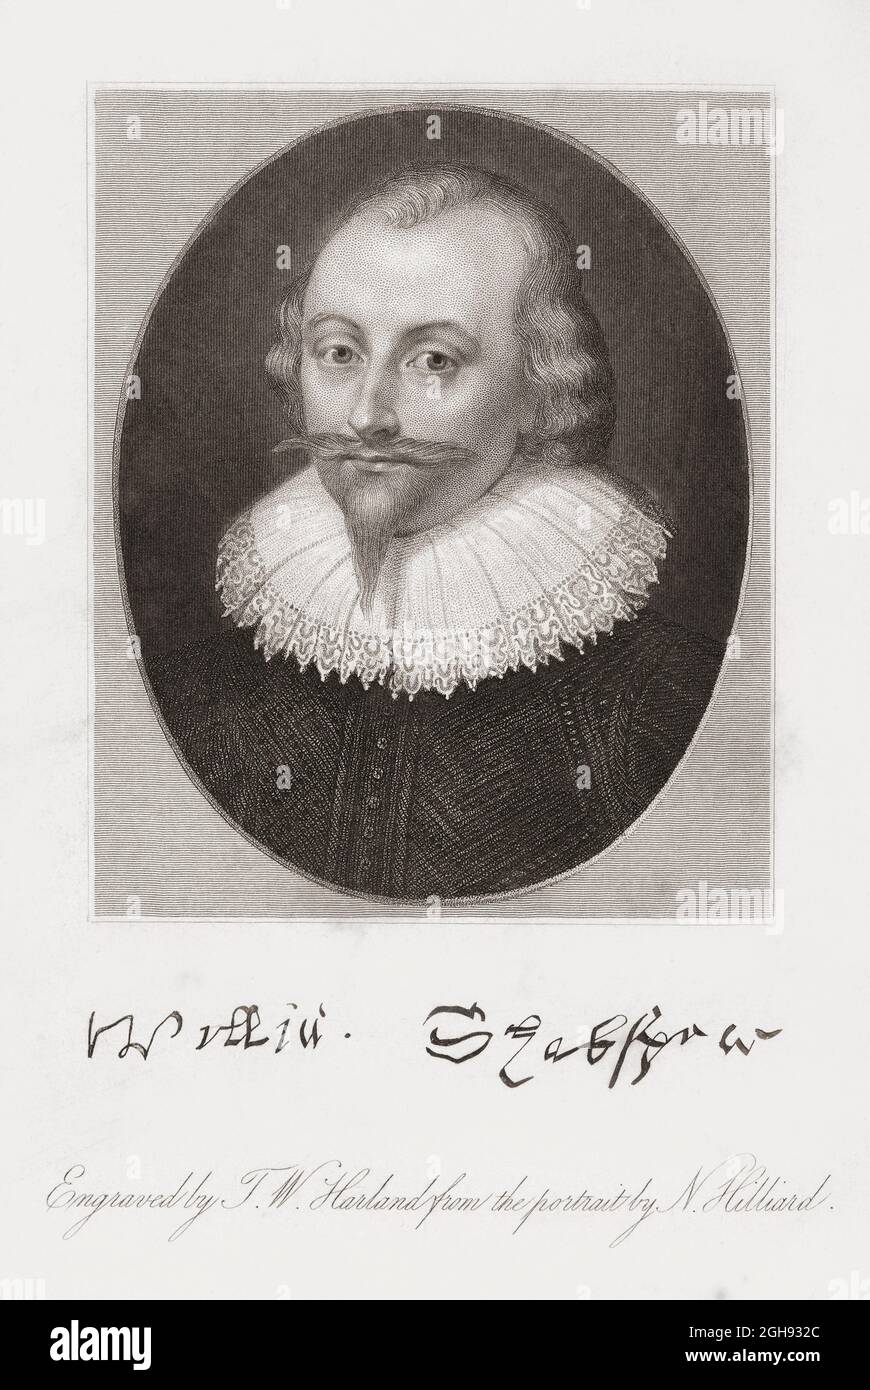 Portrait of William Shakespeare engraved by 19th century English engraver T.W. Harland after a work attributed to N. Hilliard.  However it is thought the picture was done not by Nicholas Hilliard but by his son Laurence Hilliard.  William Shakespeare, English playwright, 1564 – 1616.  Nicholas Hilliard, English miniaturist, 1547 - 1619.  Laurence Hilliard, English miniaturist, 1582 - 1648.  There is no concensus as to whether this is an actual portrait of Shakespeare. Stock Photo